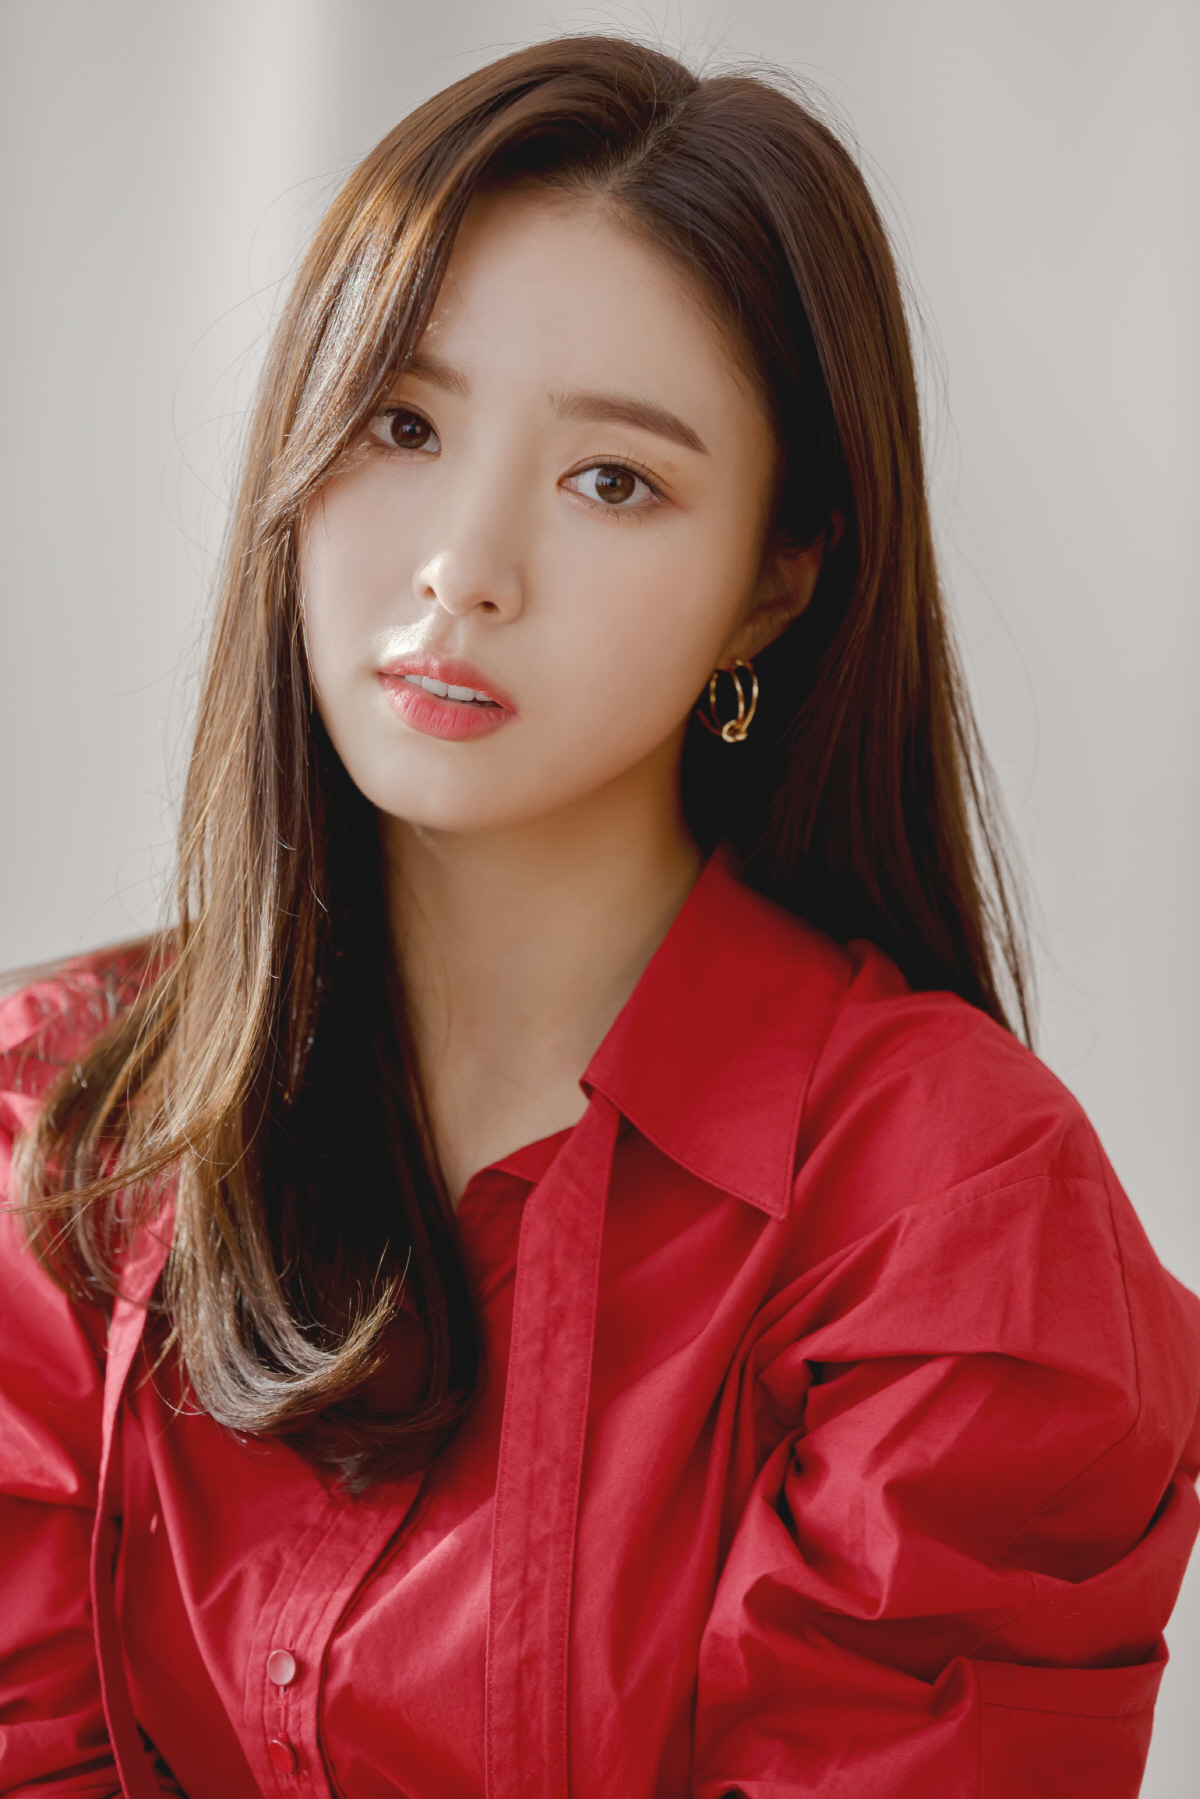 Actor Shin Se-kyung has confirmed his appearance on JTBCs new drama Run on.Actor Shin Se-kyung will return to the role of Oh miju, the main character of JTBCs new drama Run-on in the second half of this year. Run-on is a romance drama featuring the love of two men and women.Shin Se-kyung plays a foreign currency translator with an enterprising tendency and a candid youth Oh miju with emotion.Shin Se-kyung hopes how Shin Se-kyung will express the coolness of the Americas, which has a good sense of reality and good and dislike.The news that Shin Se-kyung is coming back as a romance drama made drama fans happy who have been waiting for Shin Se-kyungs melodrama.As an actor who emits a bright and lovely charm but draws a suction force with lyrical eyes, the wind that I want to see Shin Se-kyungs romance was achieved.The Shin Se-kyung actor is qualified to express the three-dimensional appearance of youth, and I am looking forward to the romance of Shin Se-kyung now, said an official of Run-on.Shin Se-kyung debuted in 1998 as a poster model for the Seo Taiji Take 5, and was loved for appearing in High Kick Through the Roof, Deep Rooted Tree, Kwon Ryong I Narsa and Black Knight.The line has expanded the spectrum from thick historical drama to smooth romance, building the trust of viewers.Last year, he won the Grand Prize at the end of the year awards ceremony in MBC drama New Entrepreneur Koo Hae-ryong and became an actor who believes and sees.In addition, through the YouTube channel Jinsanuna, it was surprising that it was a different way to reveal small daily life.On the other hand, JTBCs new drama Runon is a work that coincides with Lee Jae-hoon, who directed the drama Kim Kwa-jang, and the new artist Park Sihyun.Siwan and Kang Tae-oh join the cast, finish the main cast cast, start shooting in summer and broadcast this winter.